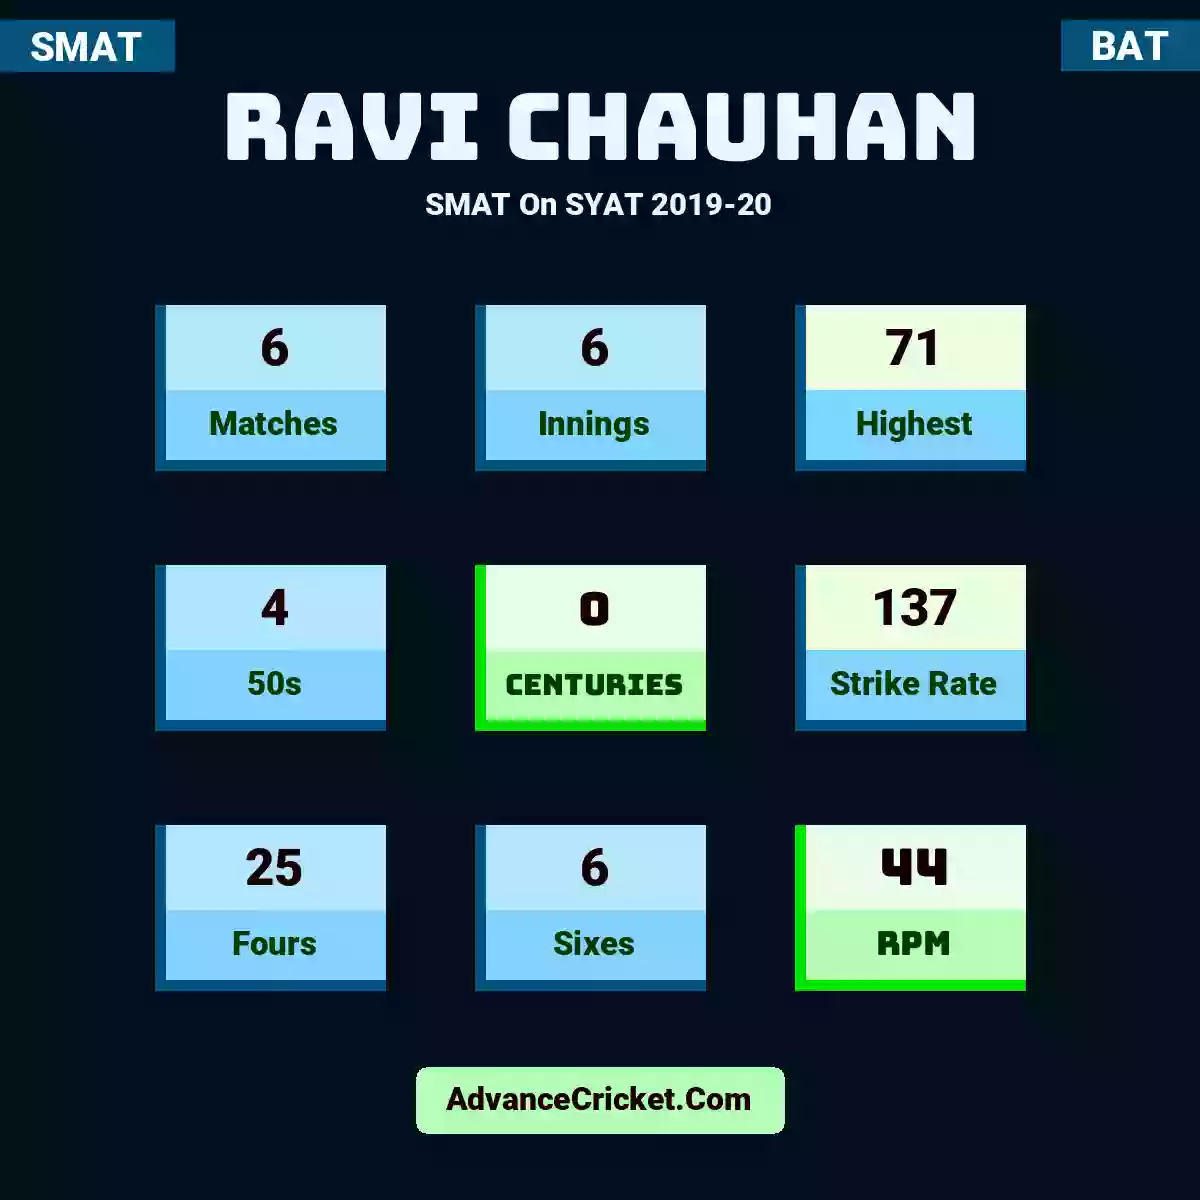 Ravi Chauhan SMAT  On SYAT 2019-20, Ravi Chauhan played 6 matches, scored 71 runs as highest, 4 half-centuries, and 0 centuries, with a strike rate of 137. R.Chauhan hit 25 fours and 6 sixes, with an RPM of 44.